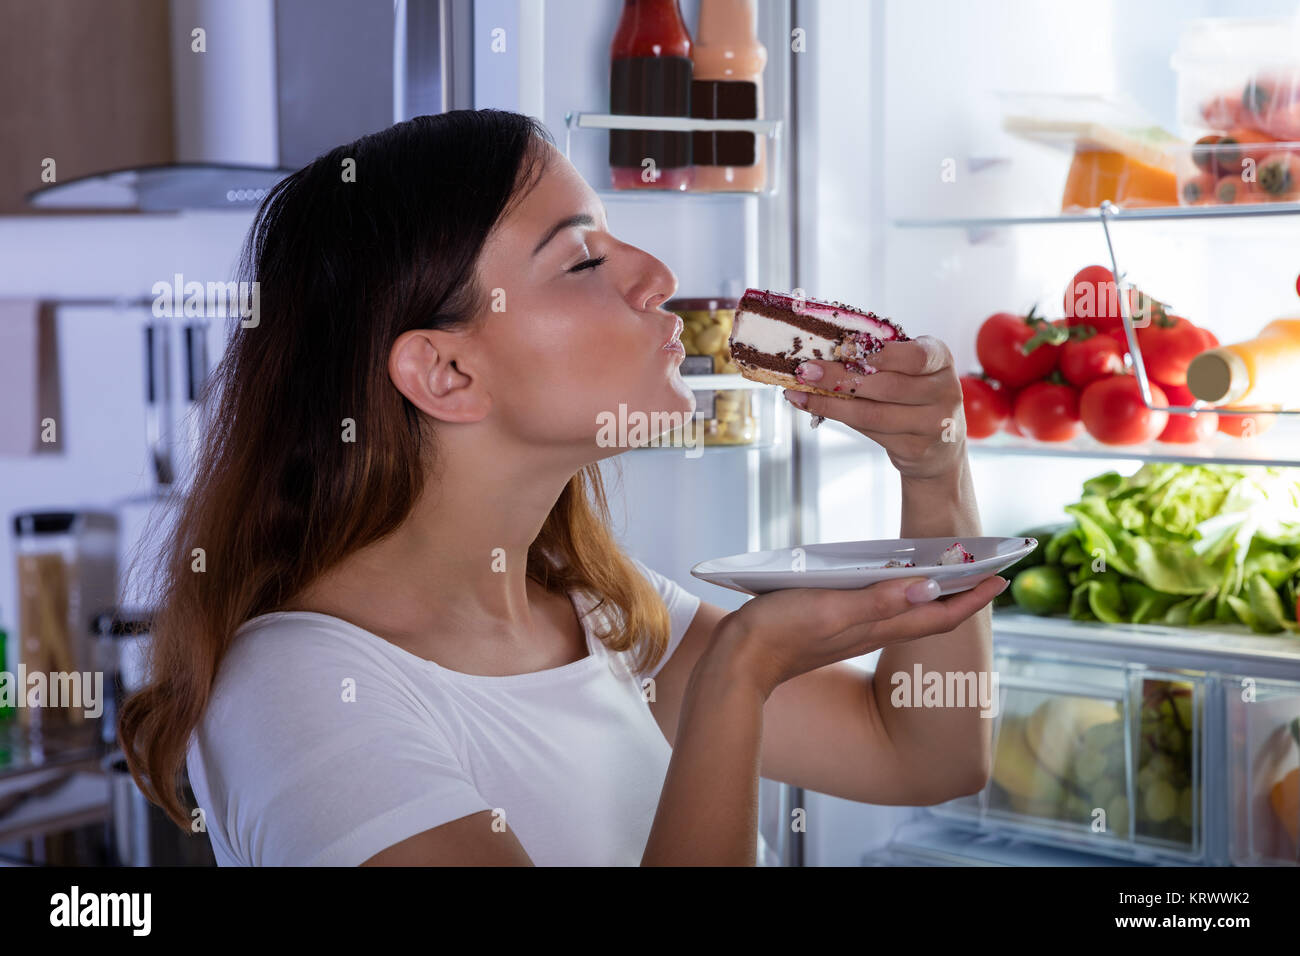 Woman Eating Cake In Front Of Refrigerator Stock Photo